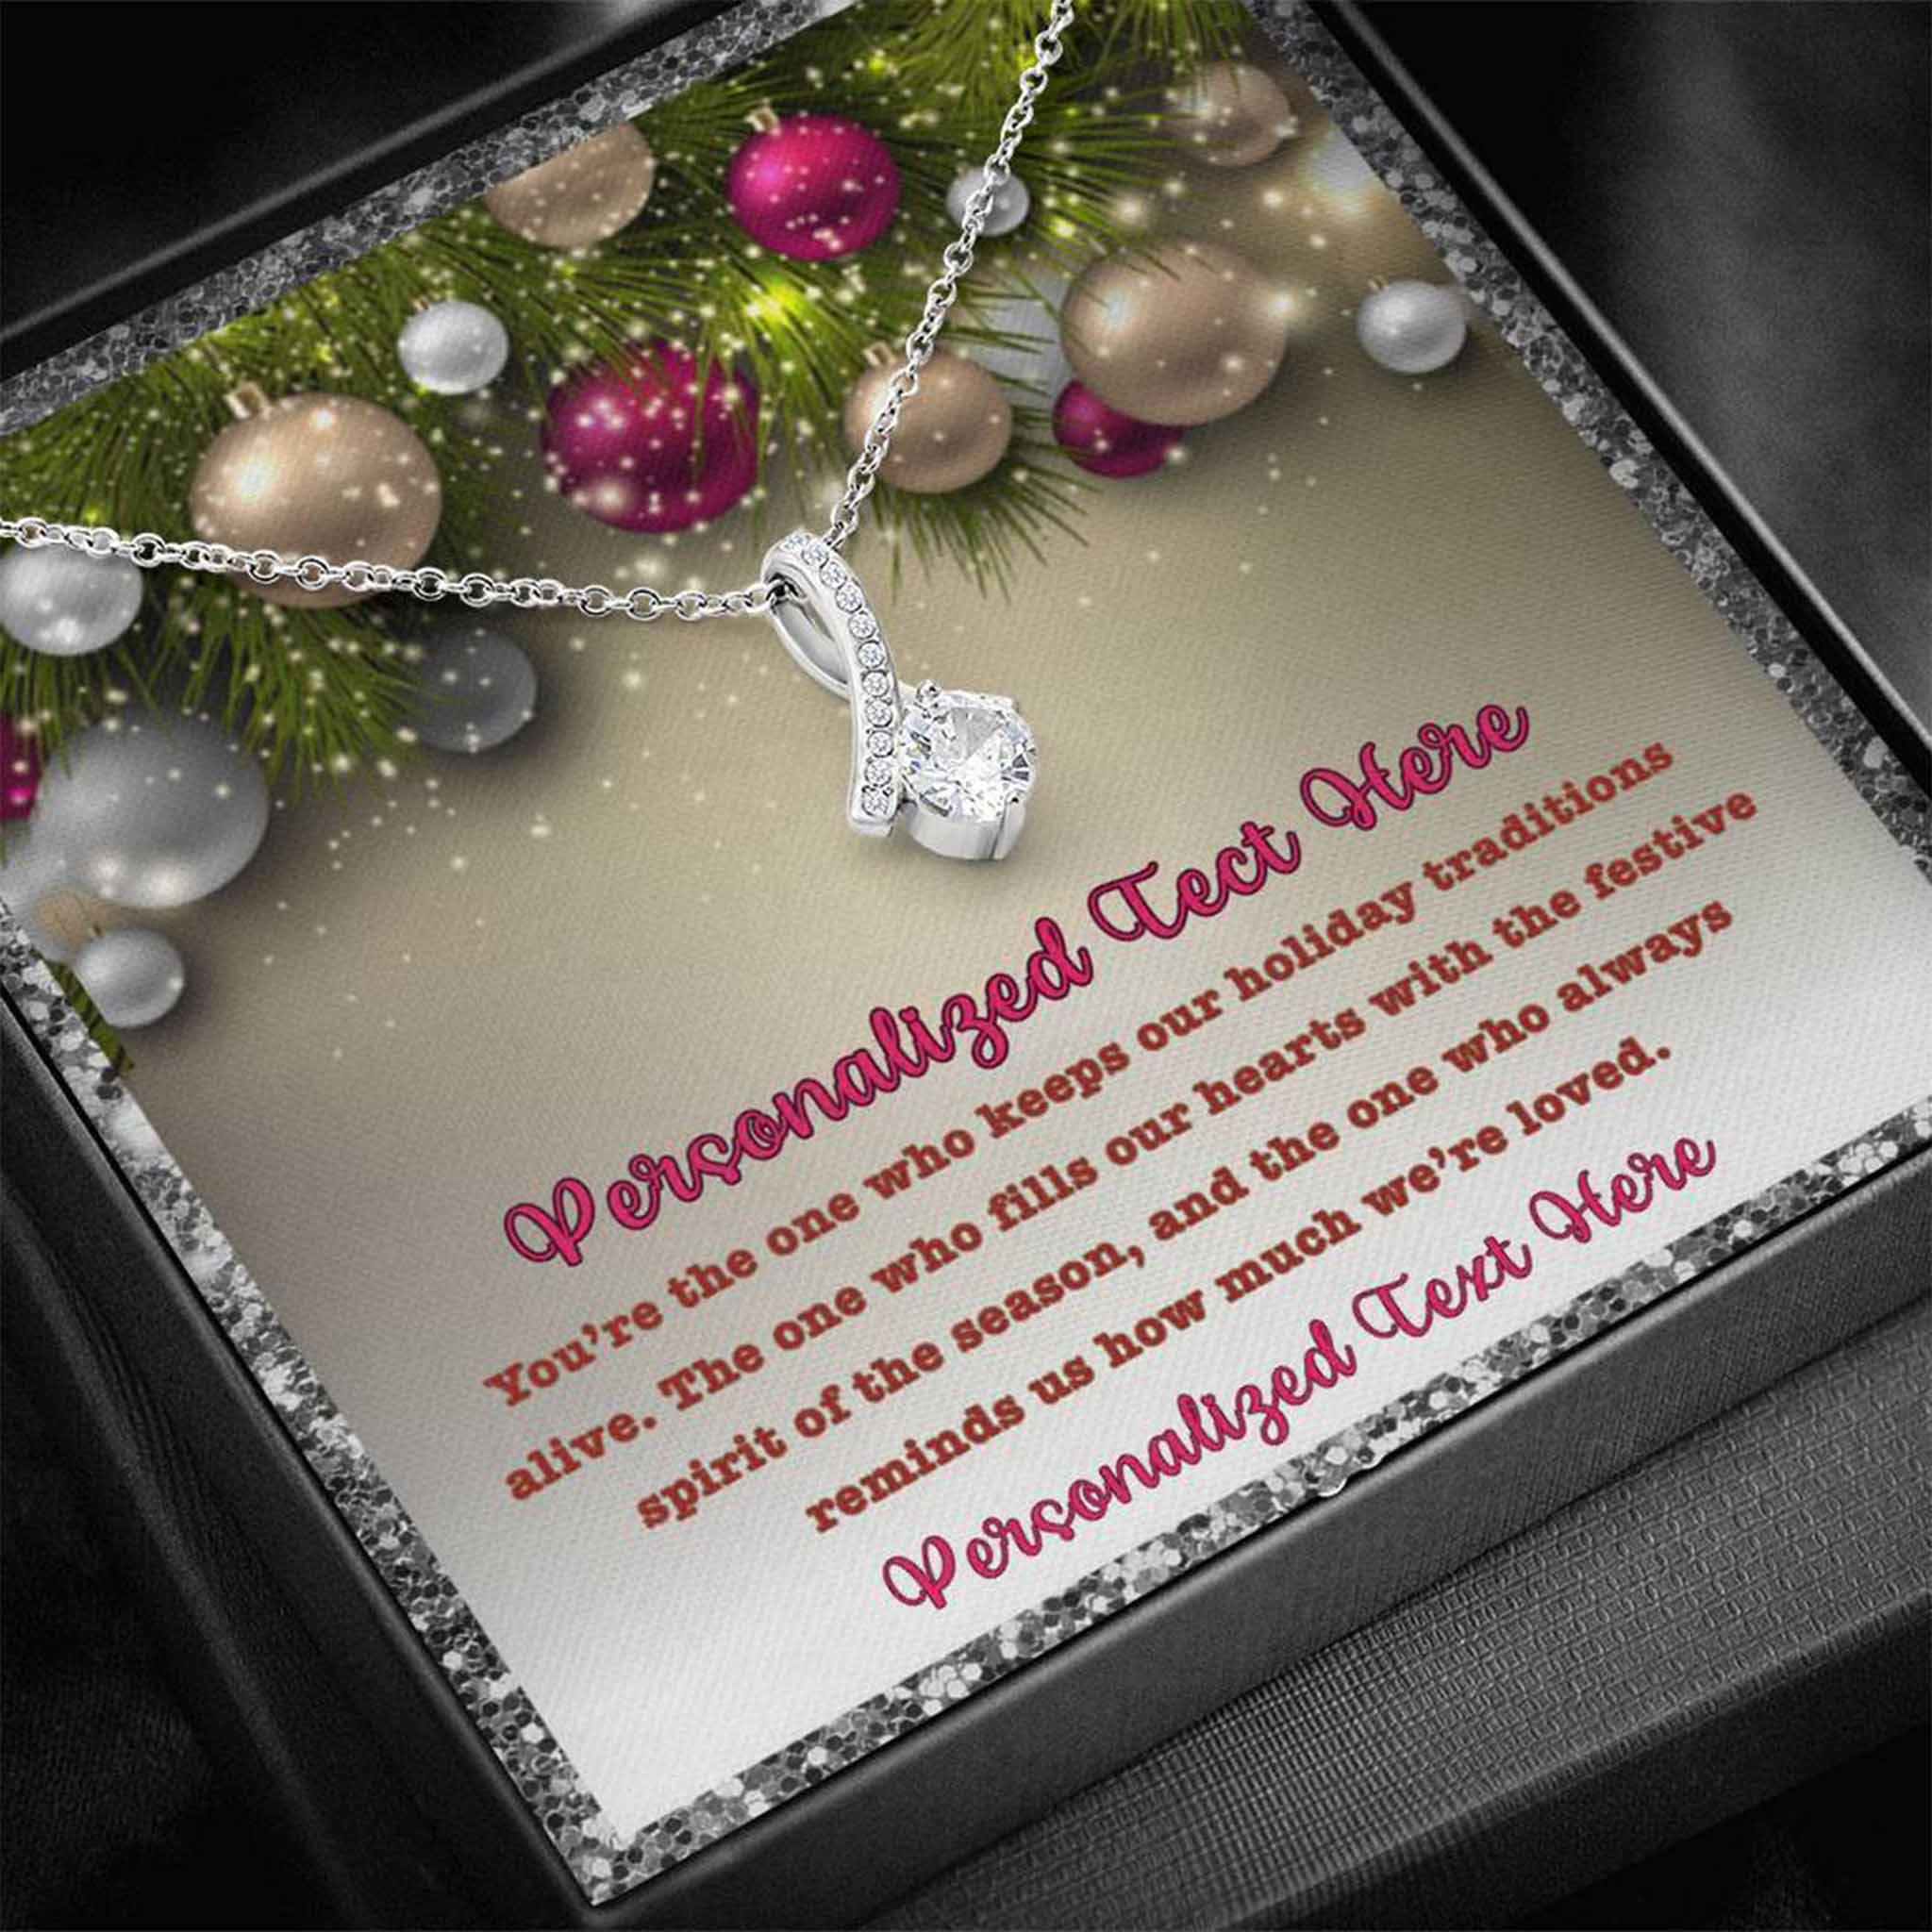 Alluring Beauty Necklace Christmas Grandmother How Much We're Loved Personalized Insert CardCustomly Gifts